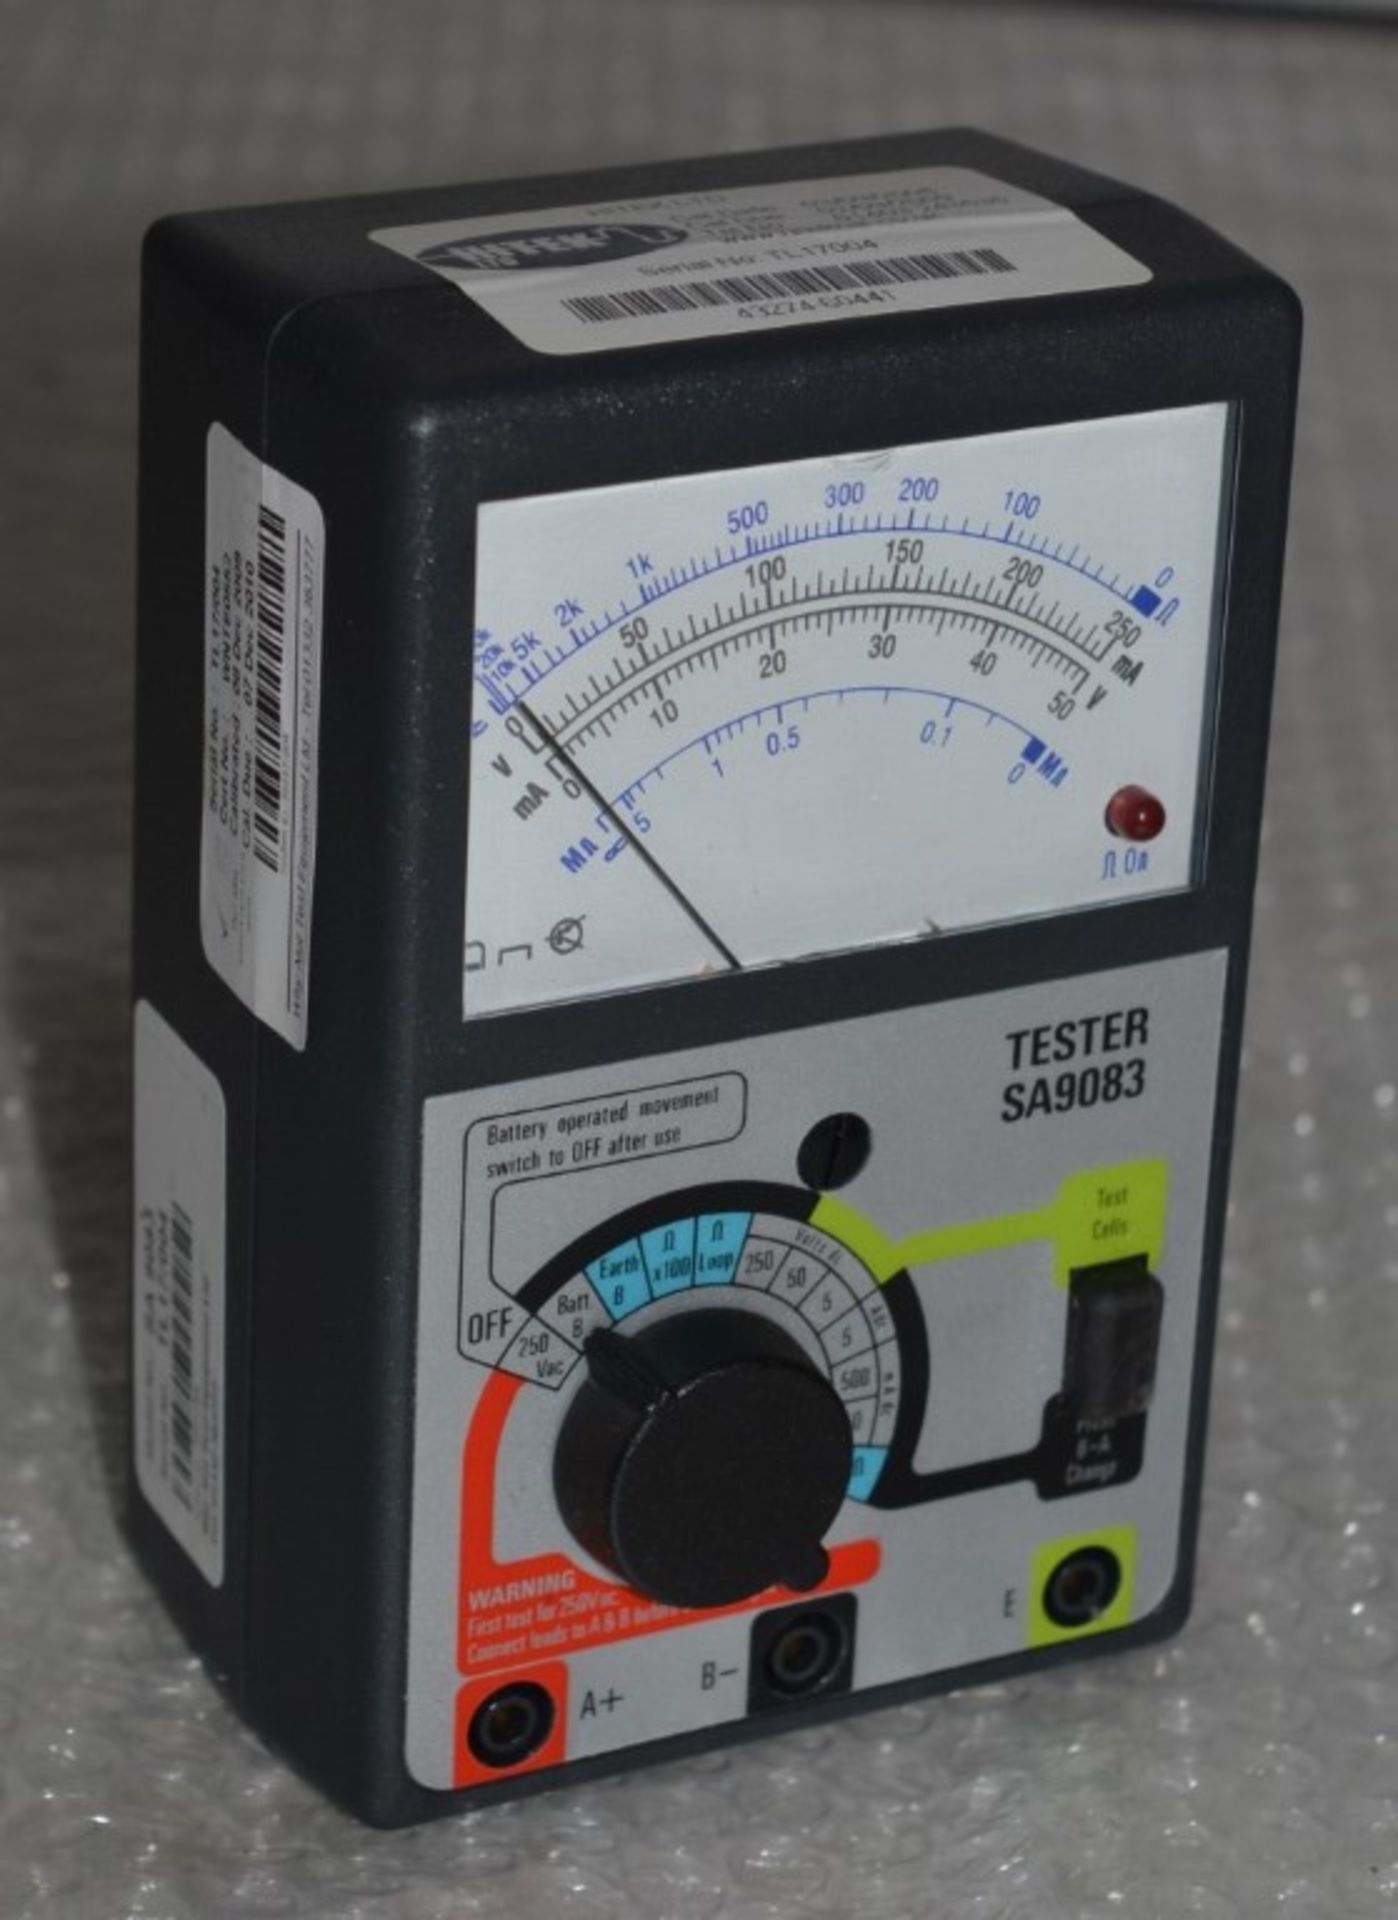 1 x Mills SA9083 Multimeter - Suitable For Telephone Engineers in Maintenance Testing - With Carry - Image 10 of 16